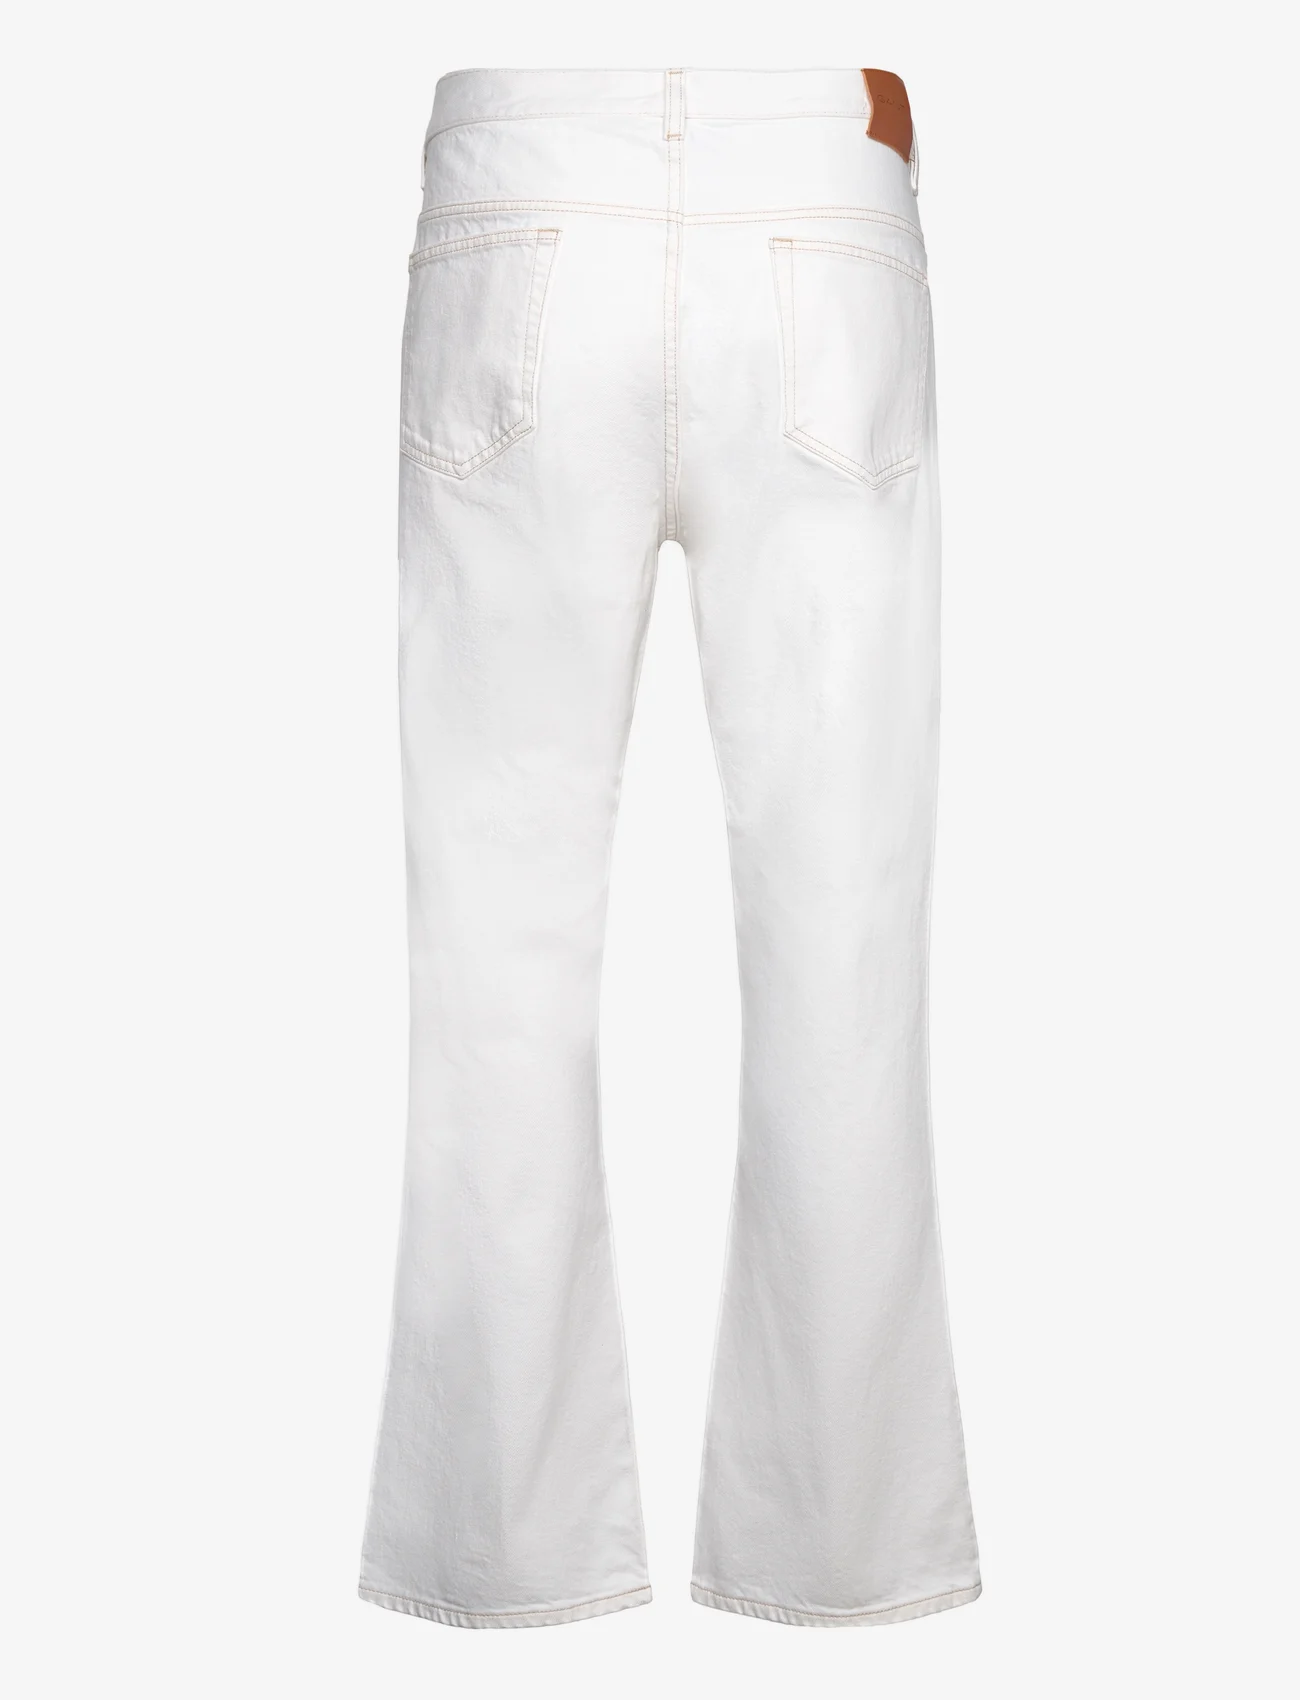 GANT - WHITE LOOSE FIT JEANS - loose jeans - eggshell - 1